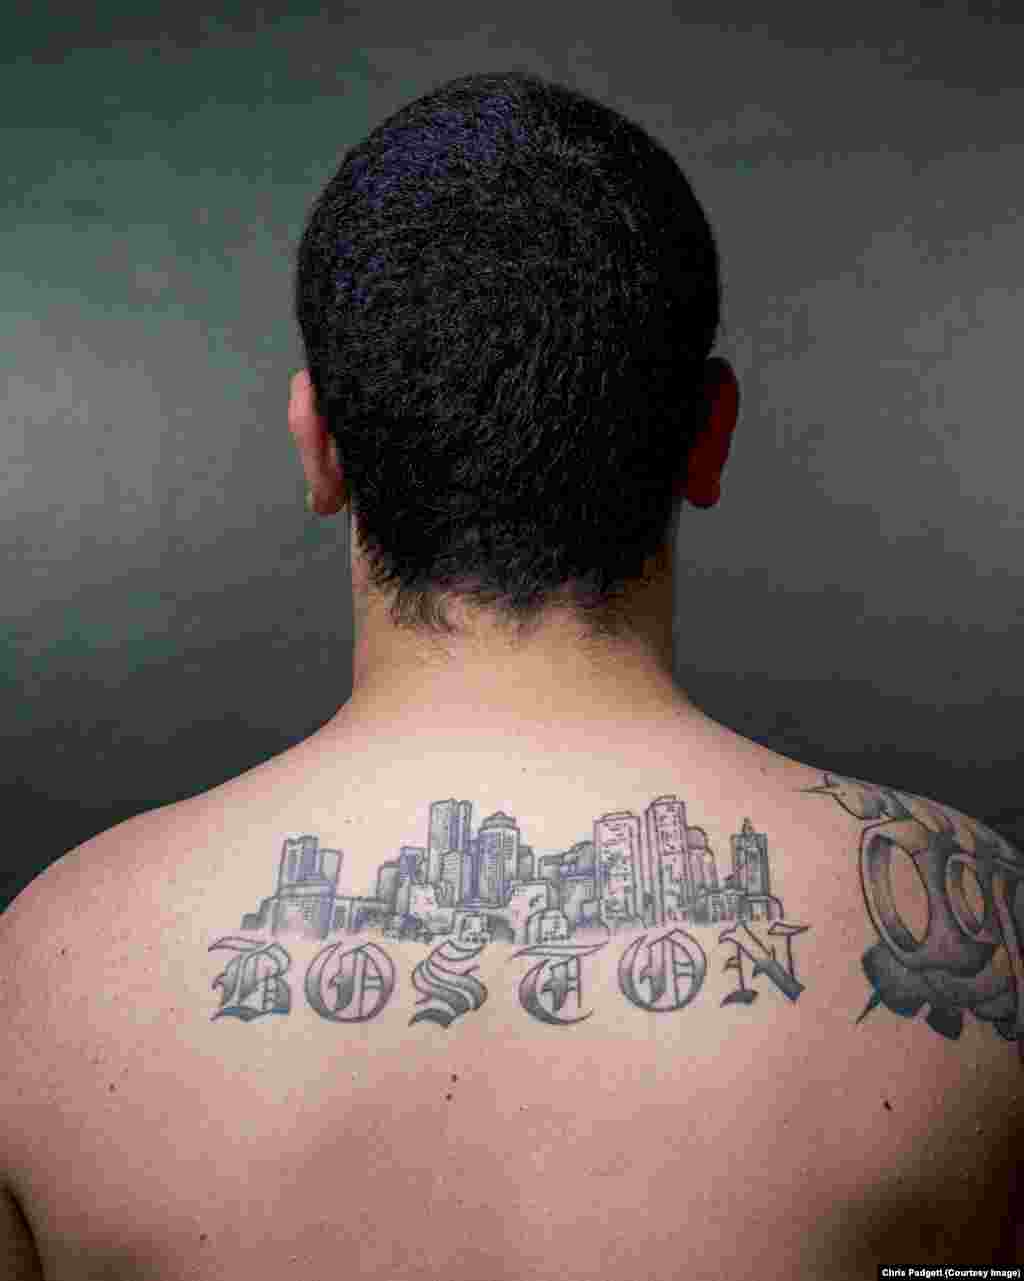 Patrick Neil&rsquo;s tattoo depicts the view of Boston he remembers from childhood.